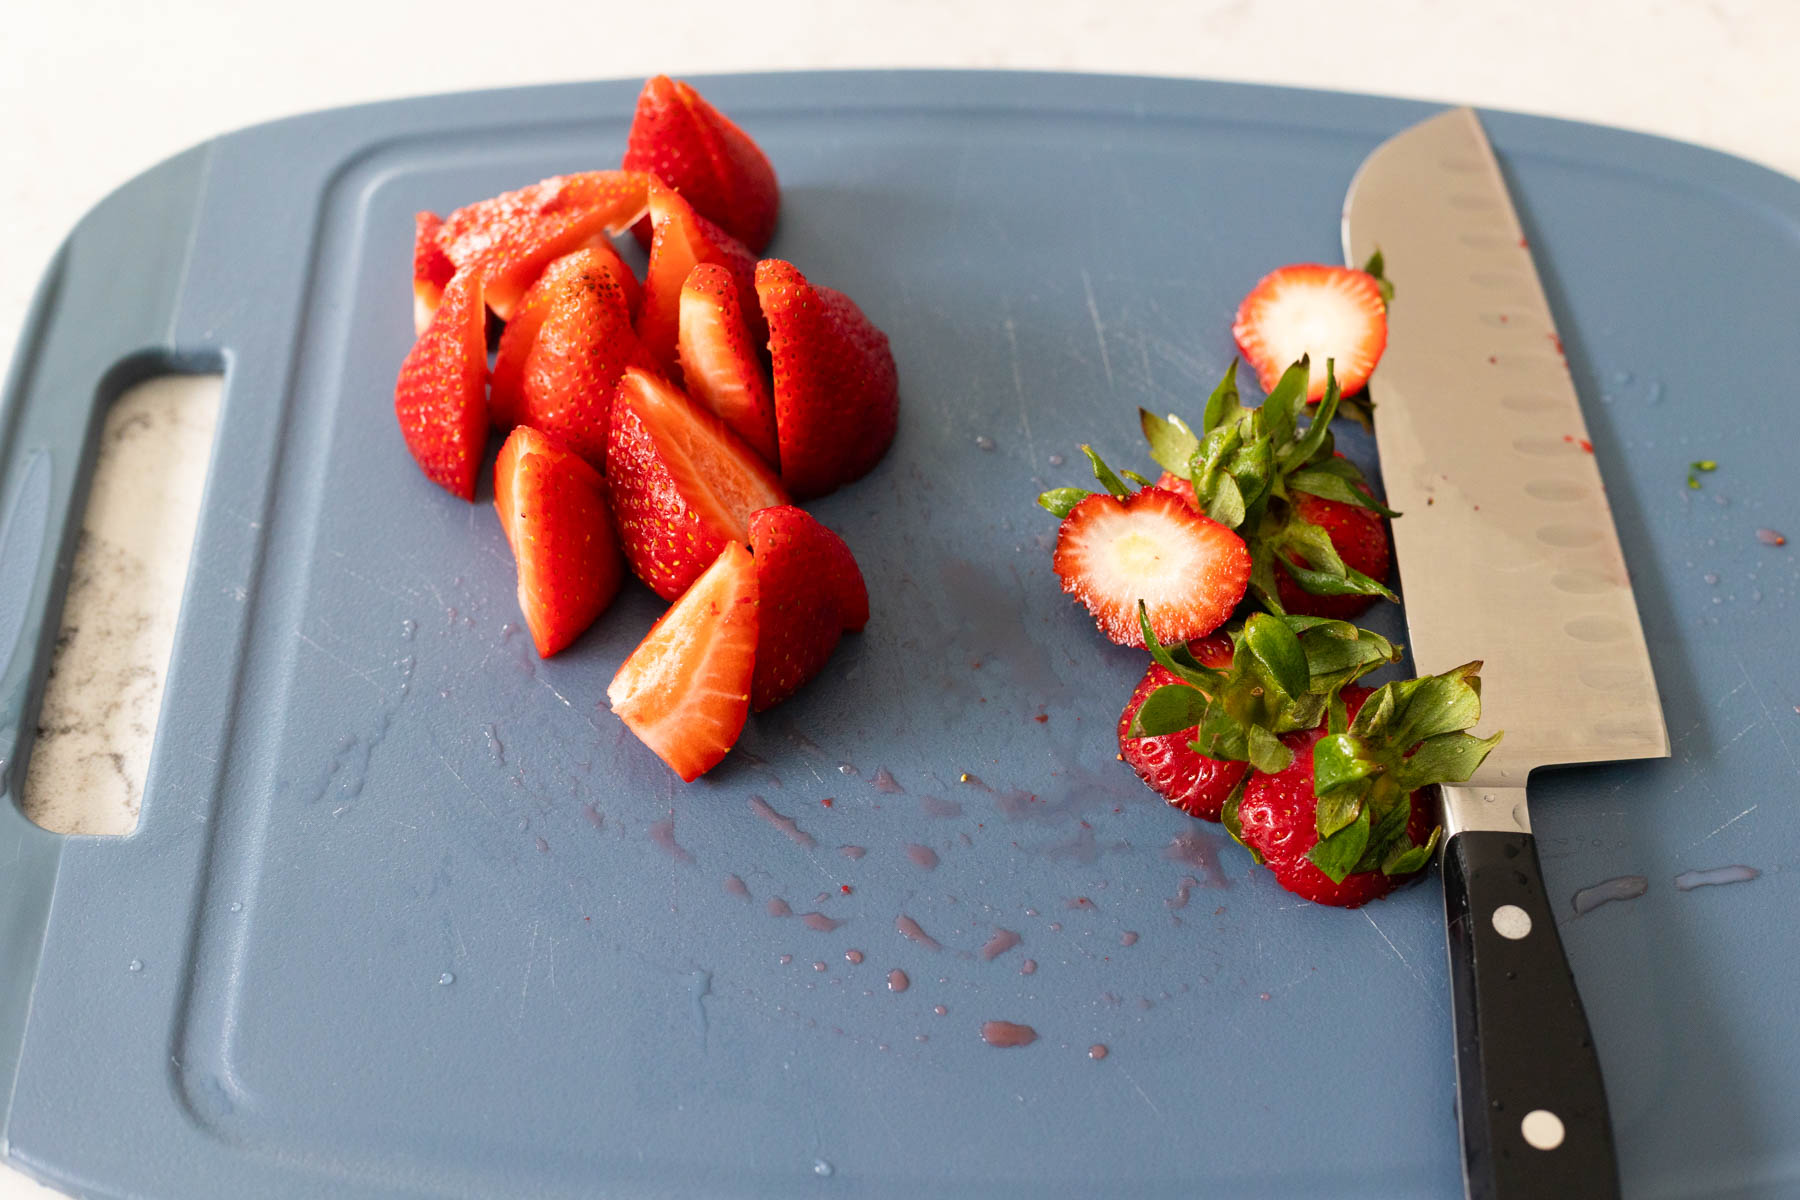 Fresh strawberries have been cut into quarters on a cutting board.